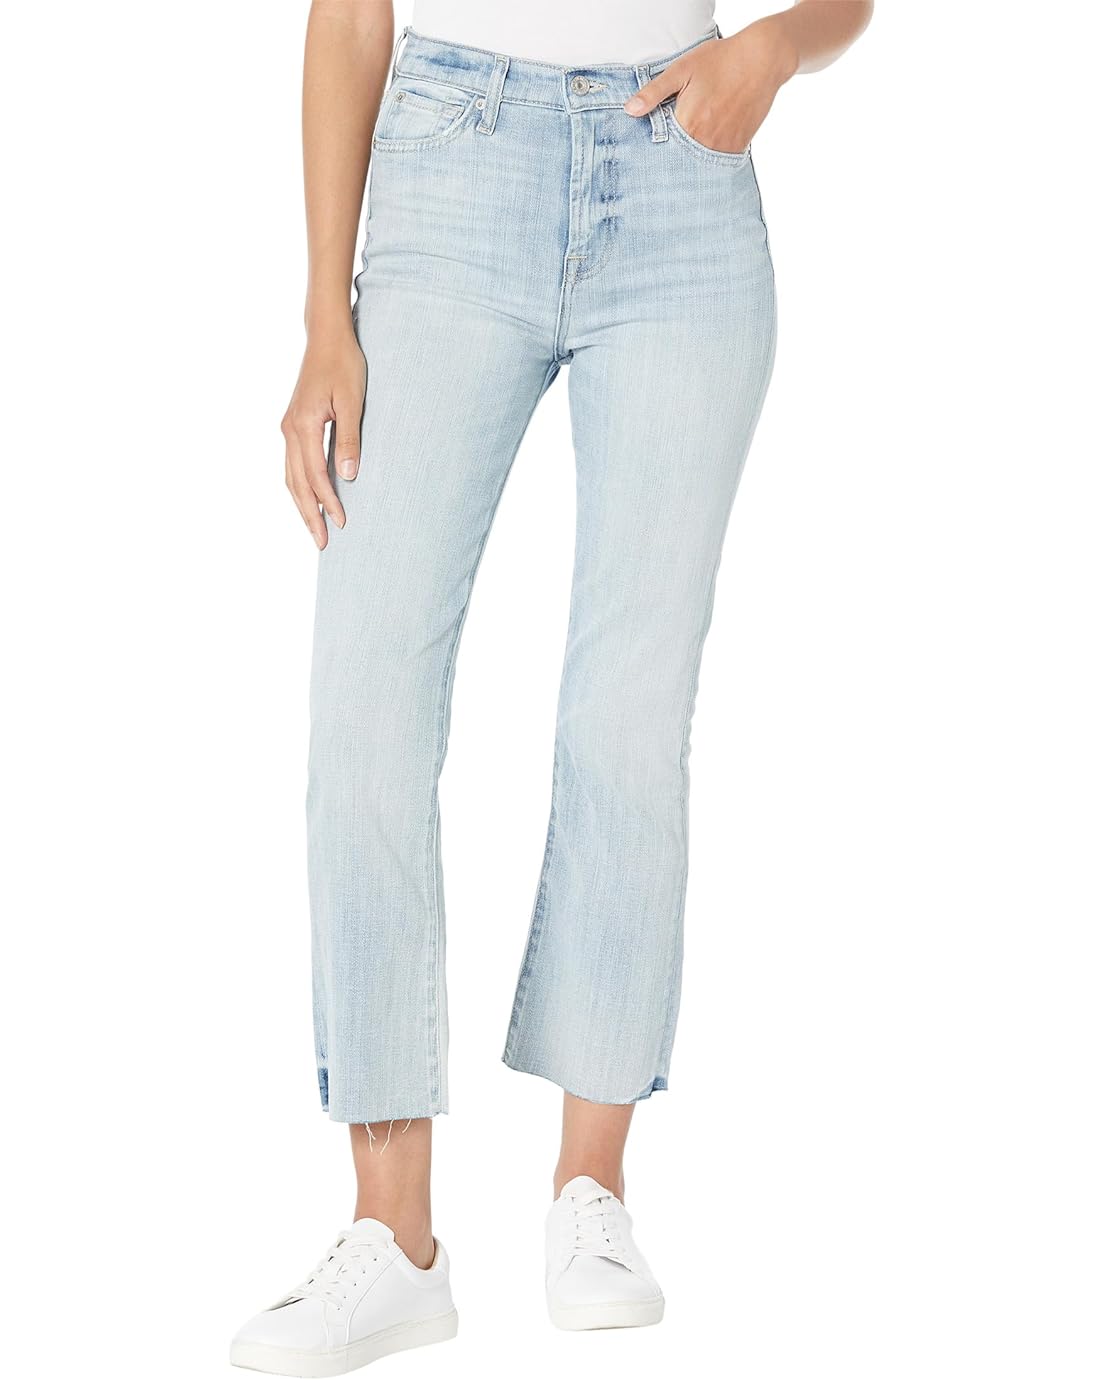 7 For All Mankind High-Waist Slim Kick in Coco Prive